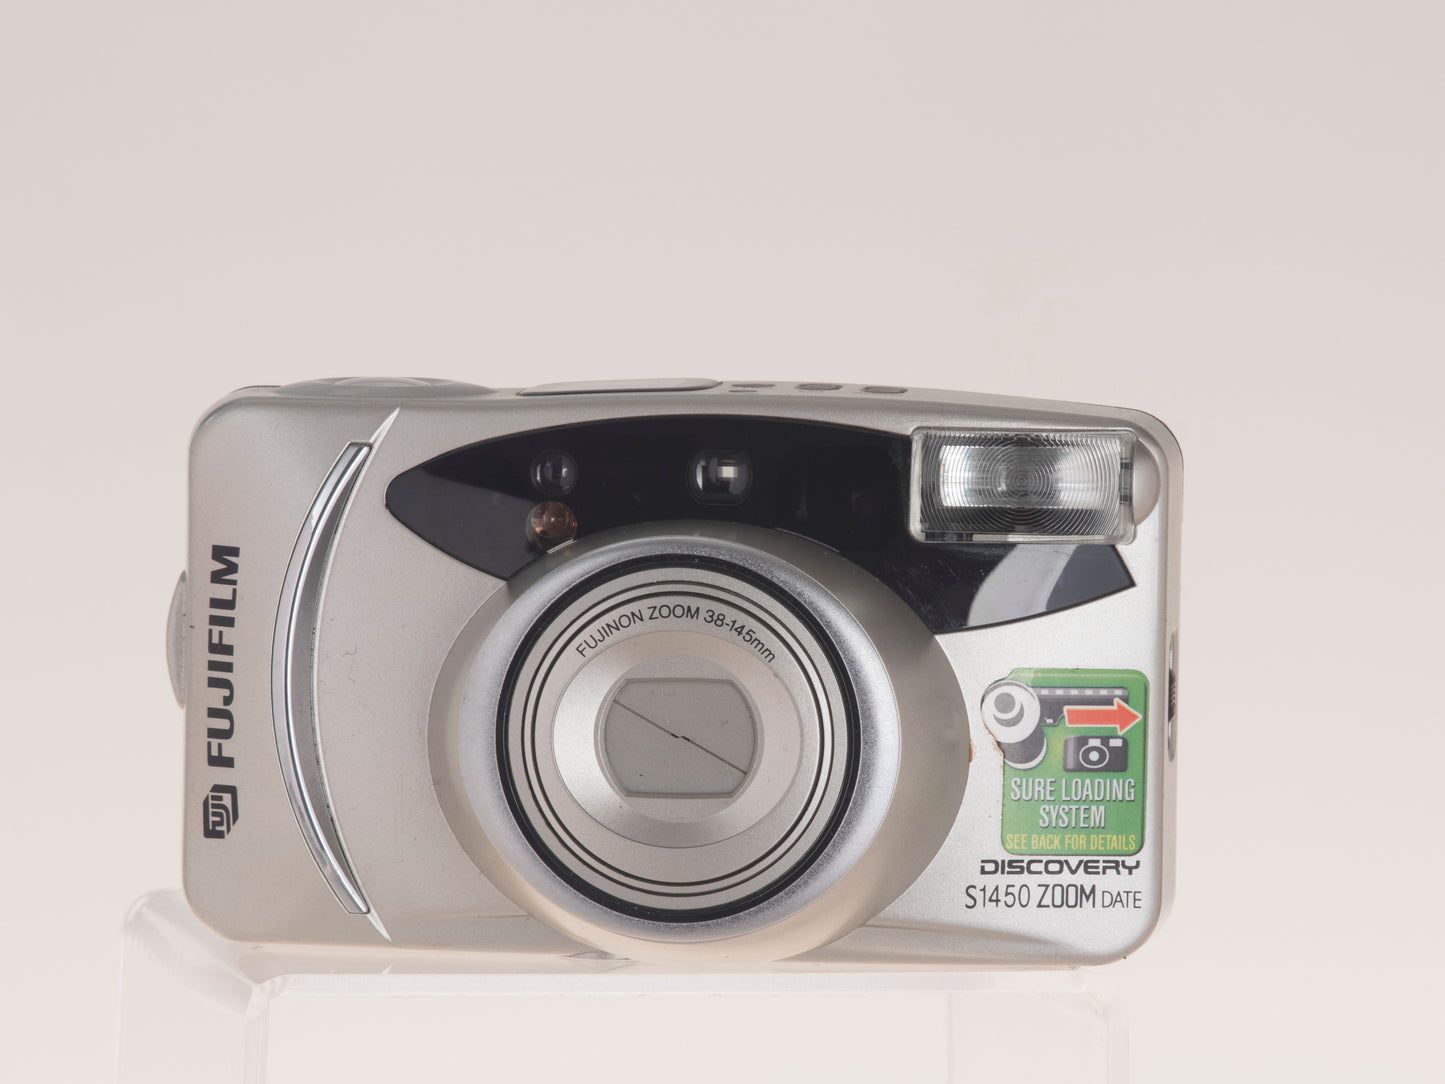 Fujifilm Discovery S1450 Zoom Date front view powered off